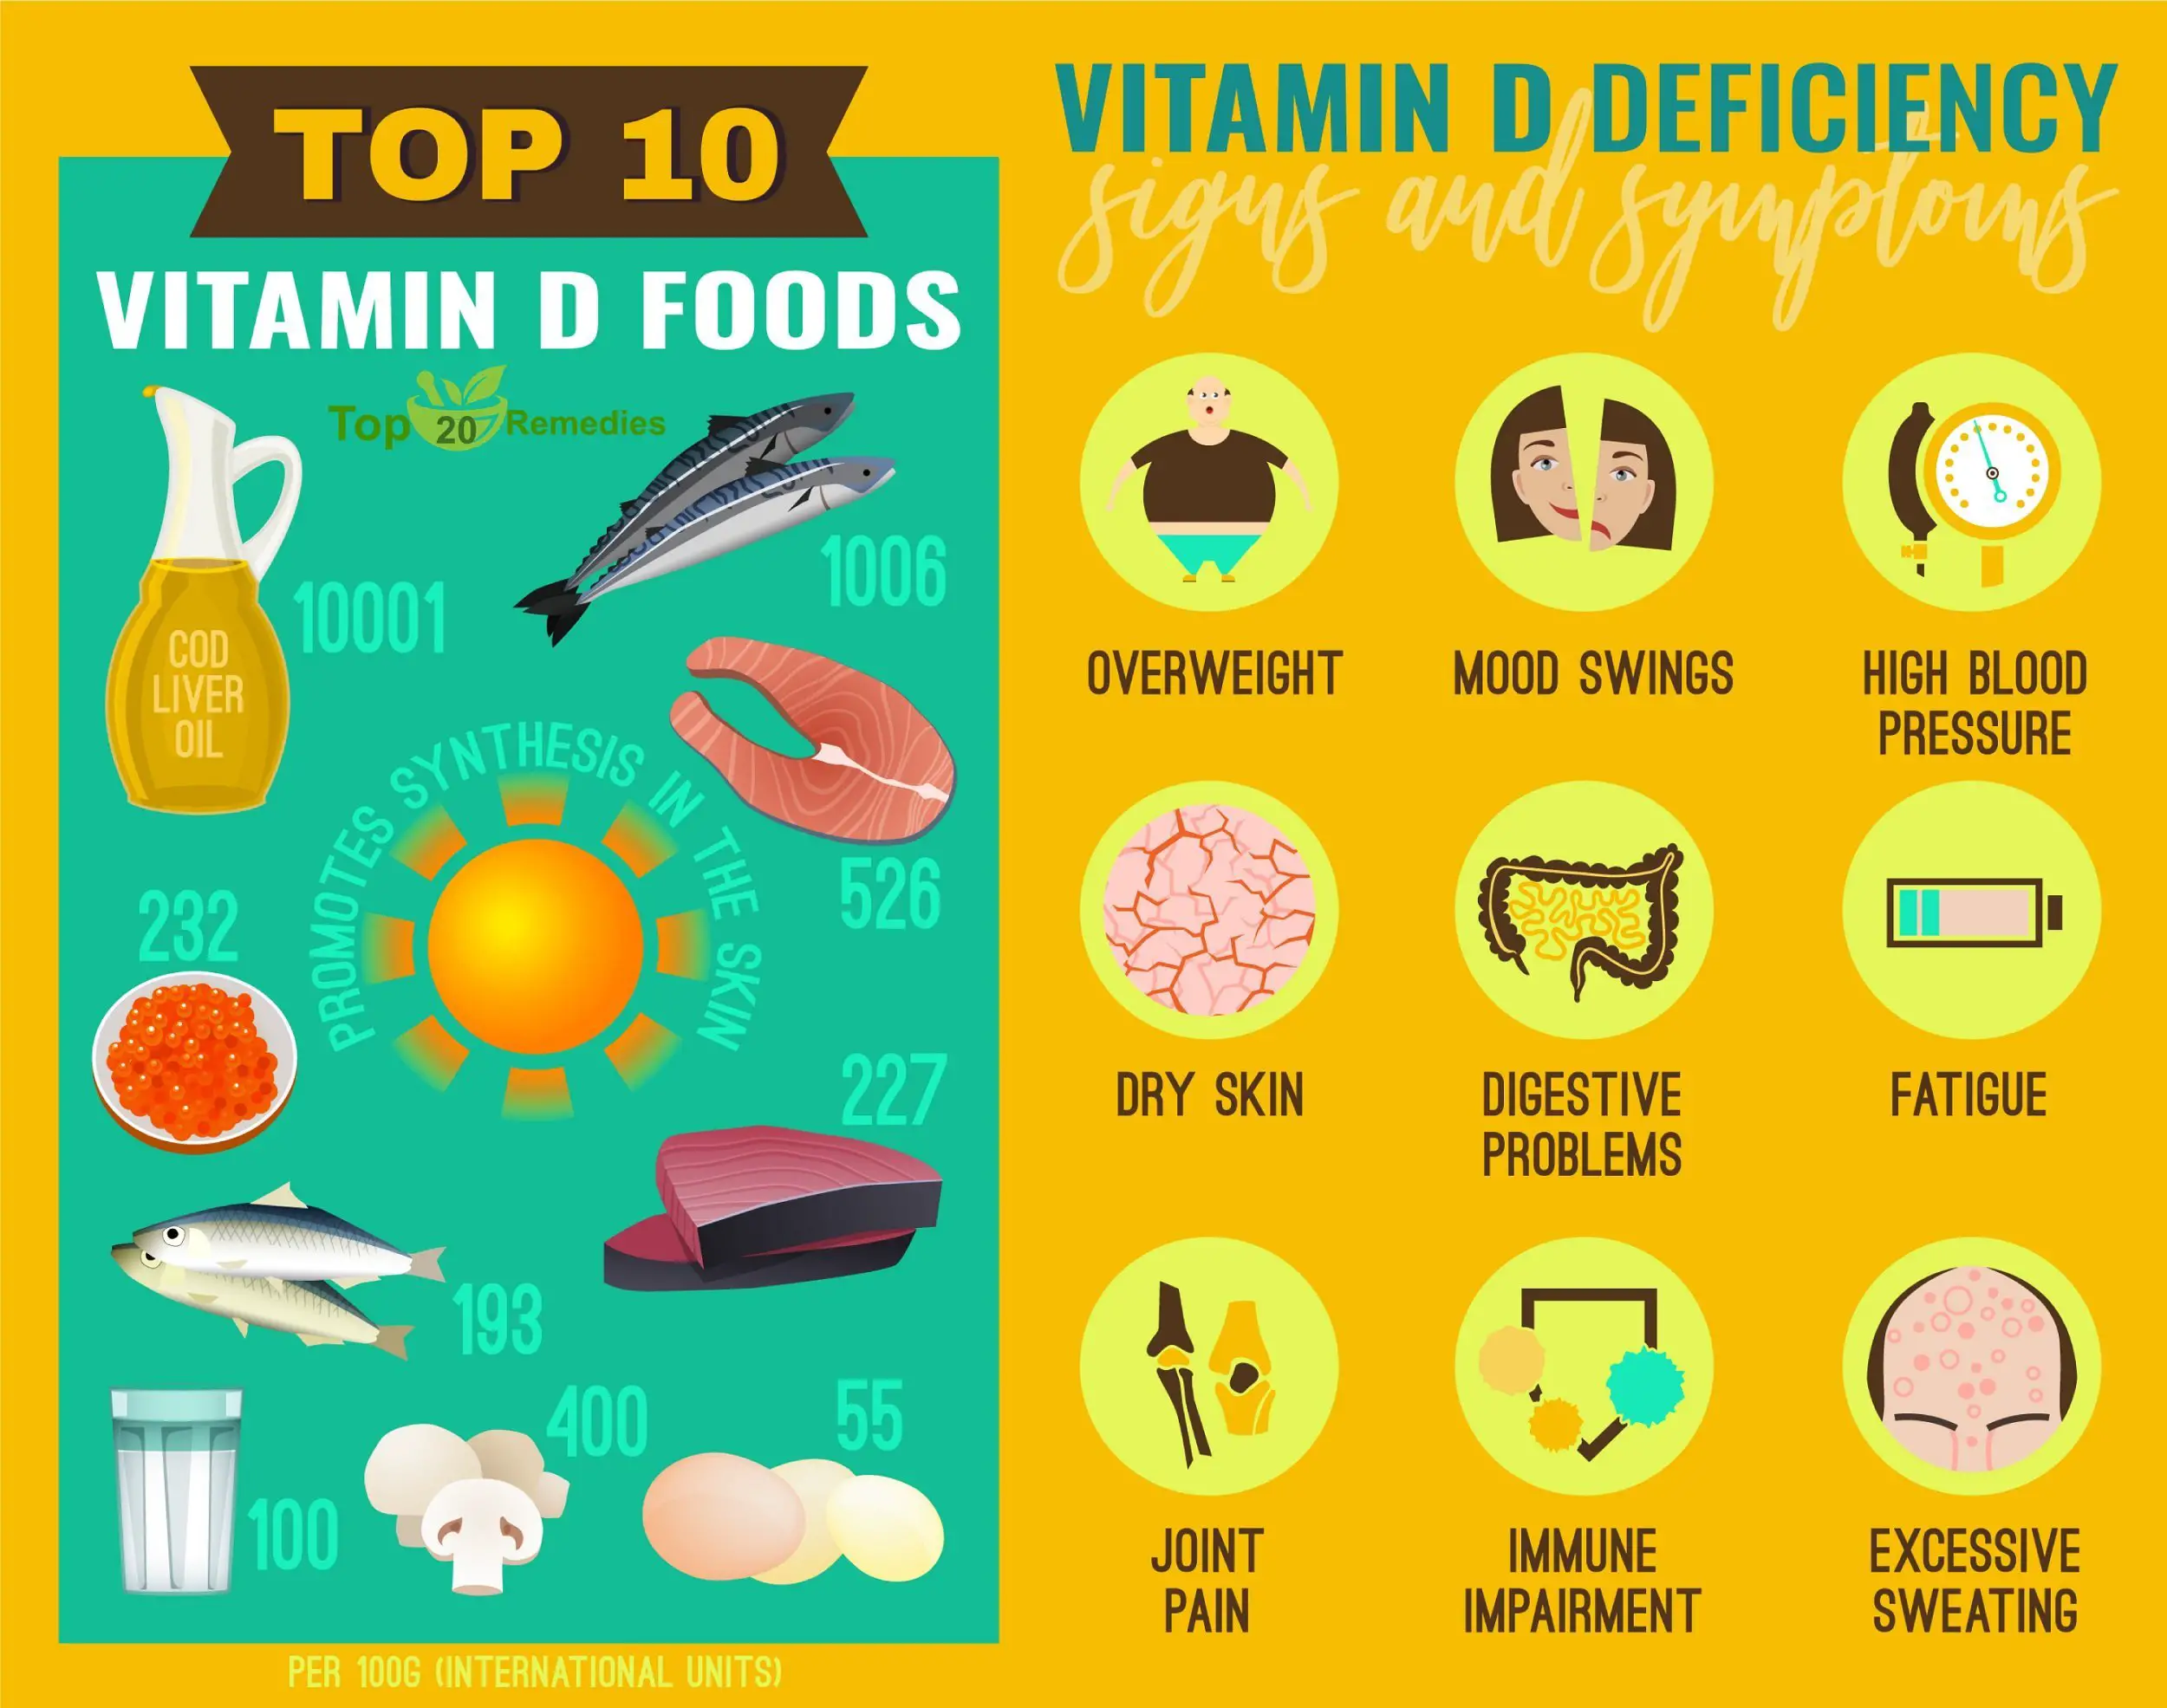 How to overcome vitamin d deficiency naturally